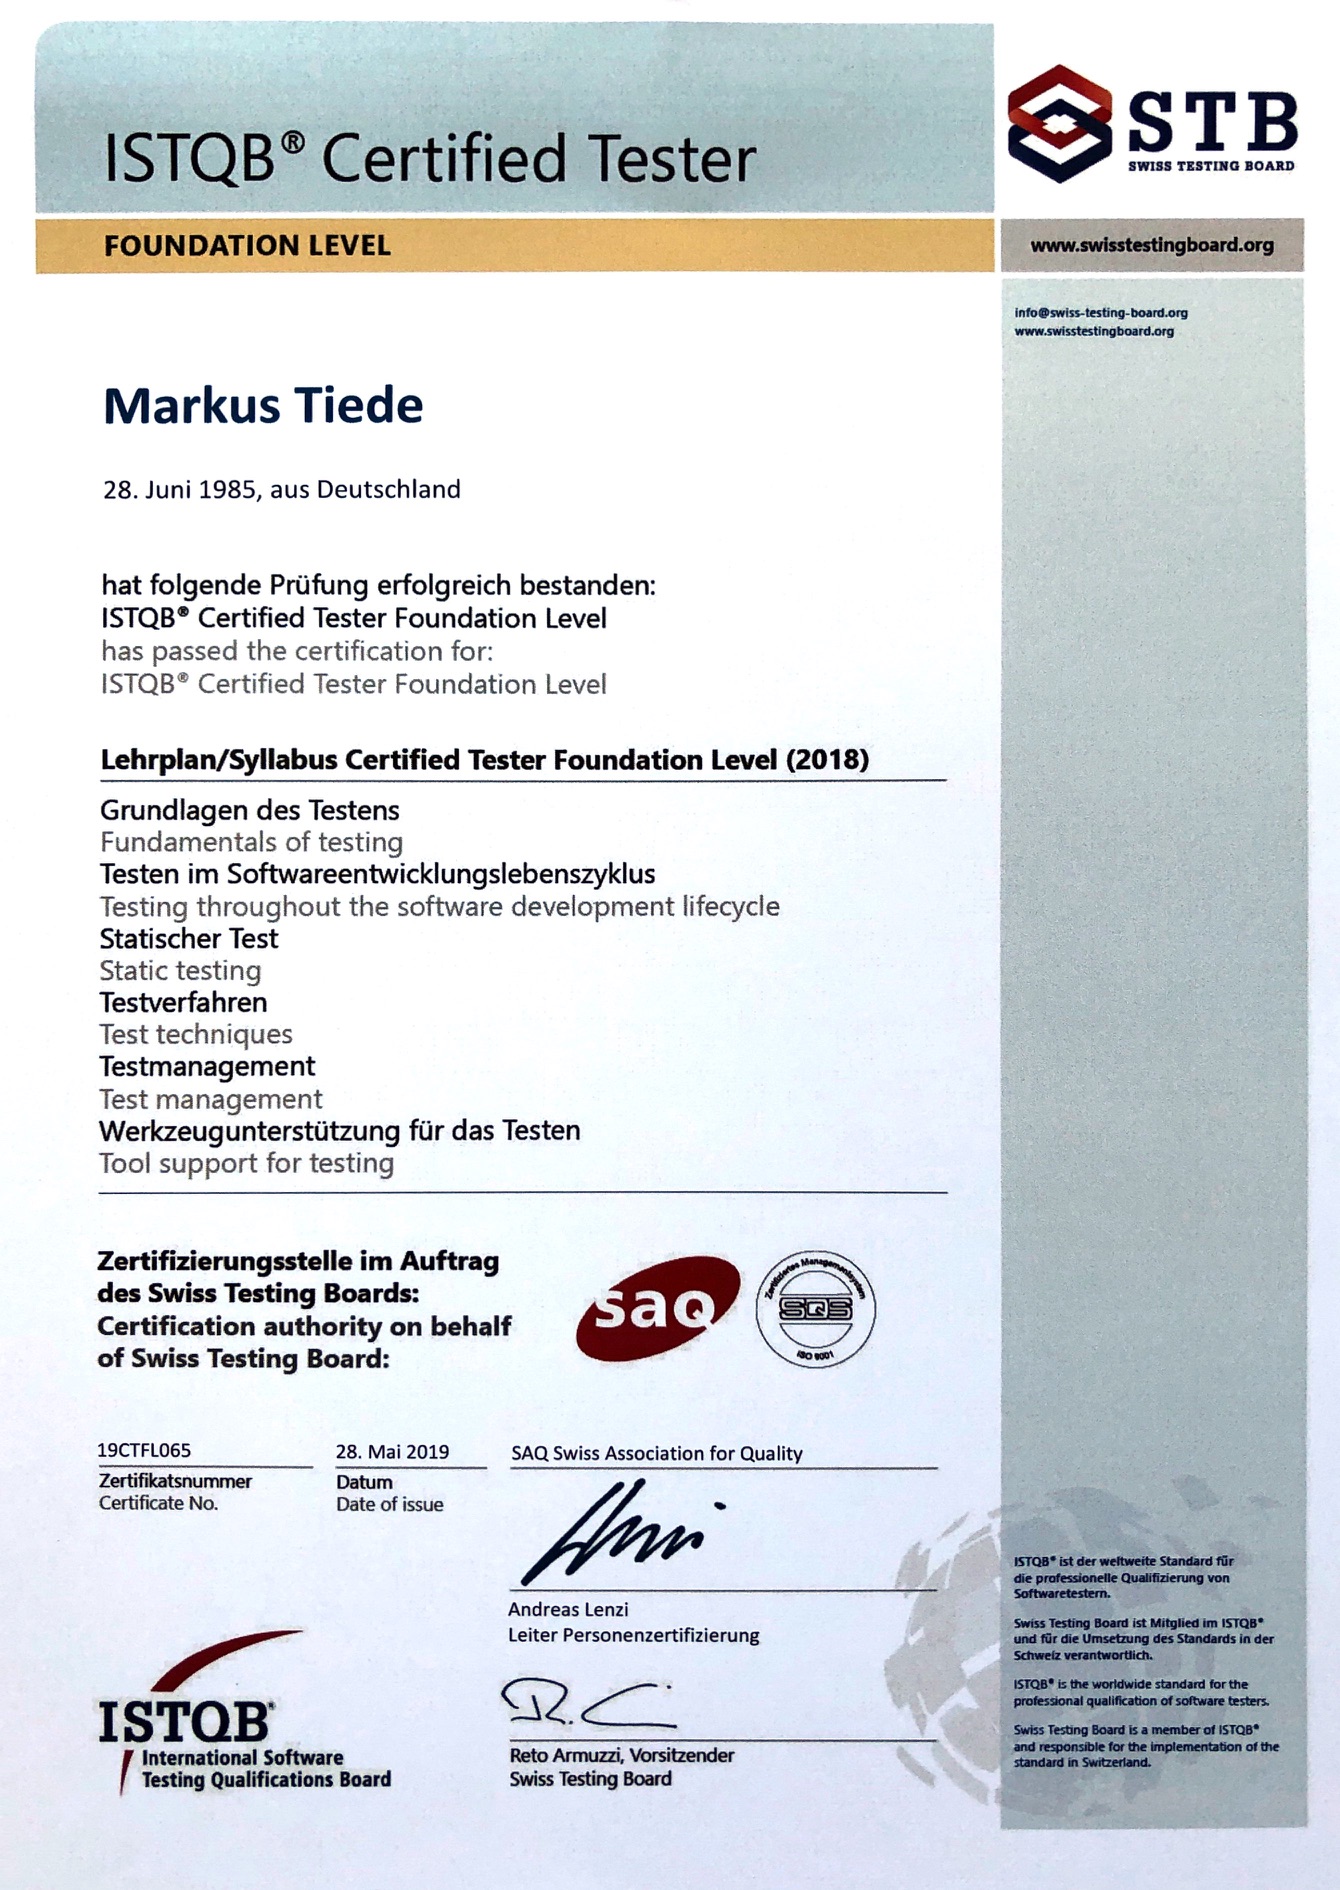 My ISTQB® - Certified Tester - Foundation Level Certificate